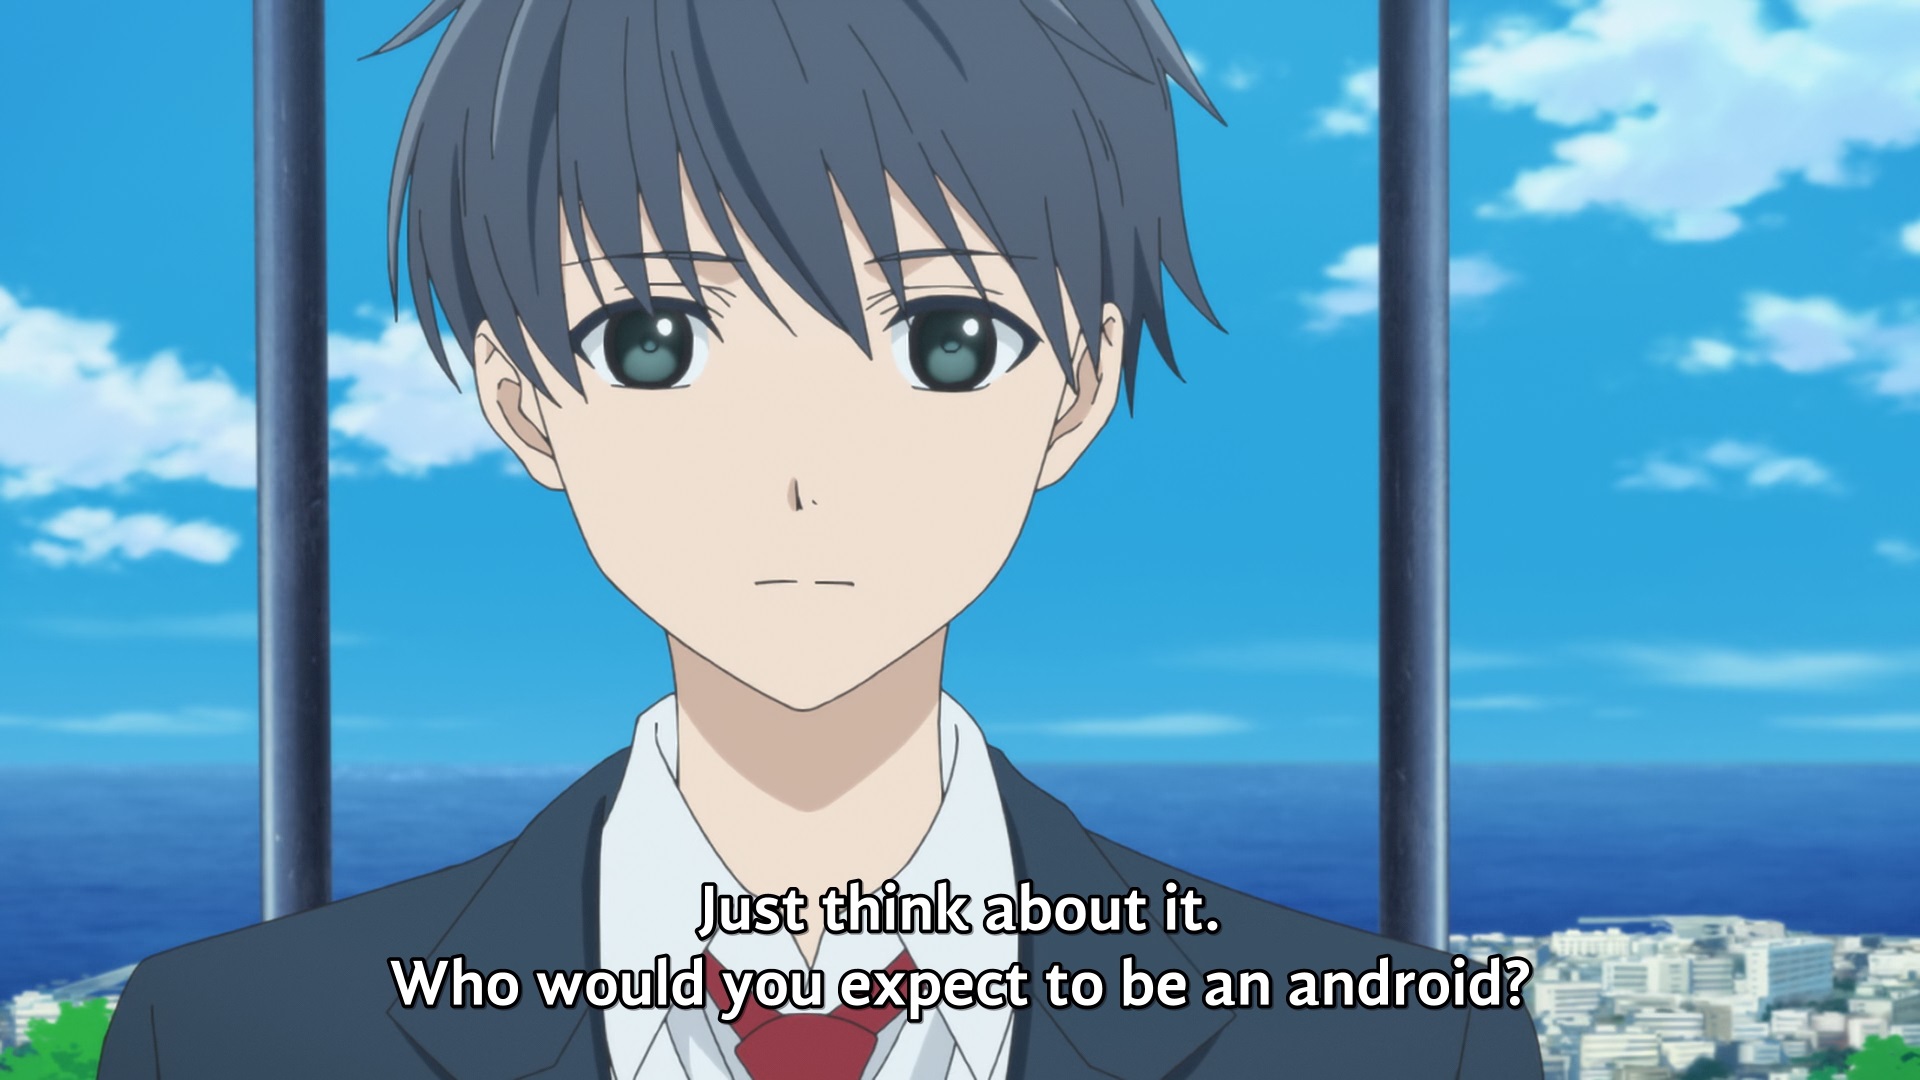 "Just think about it. Who would you expect to be an android?"